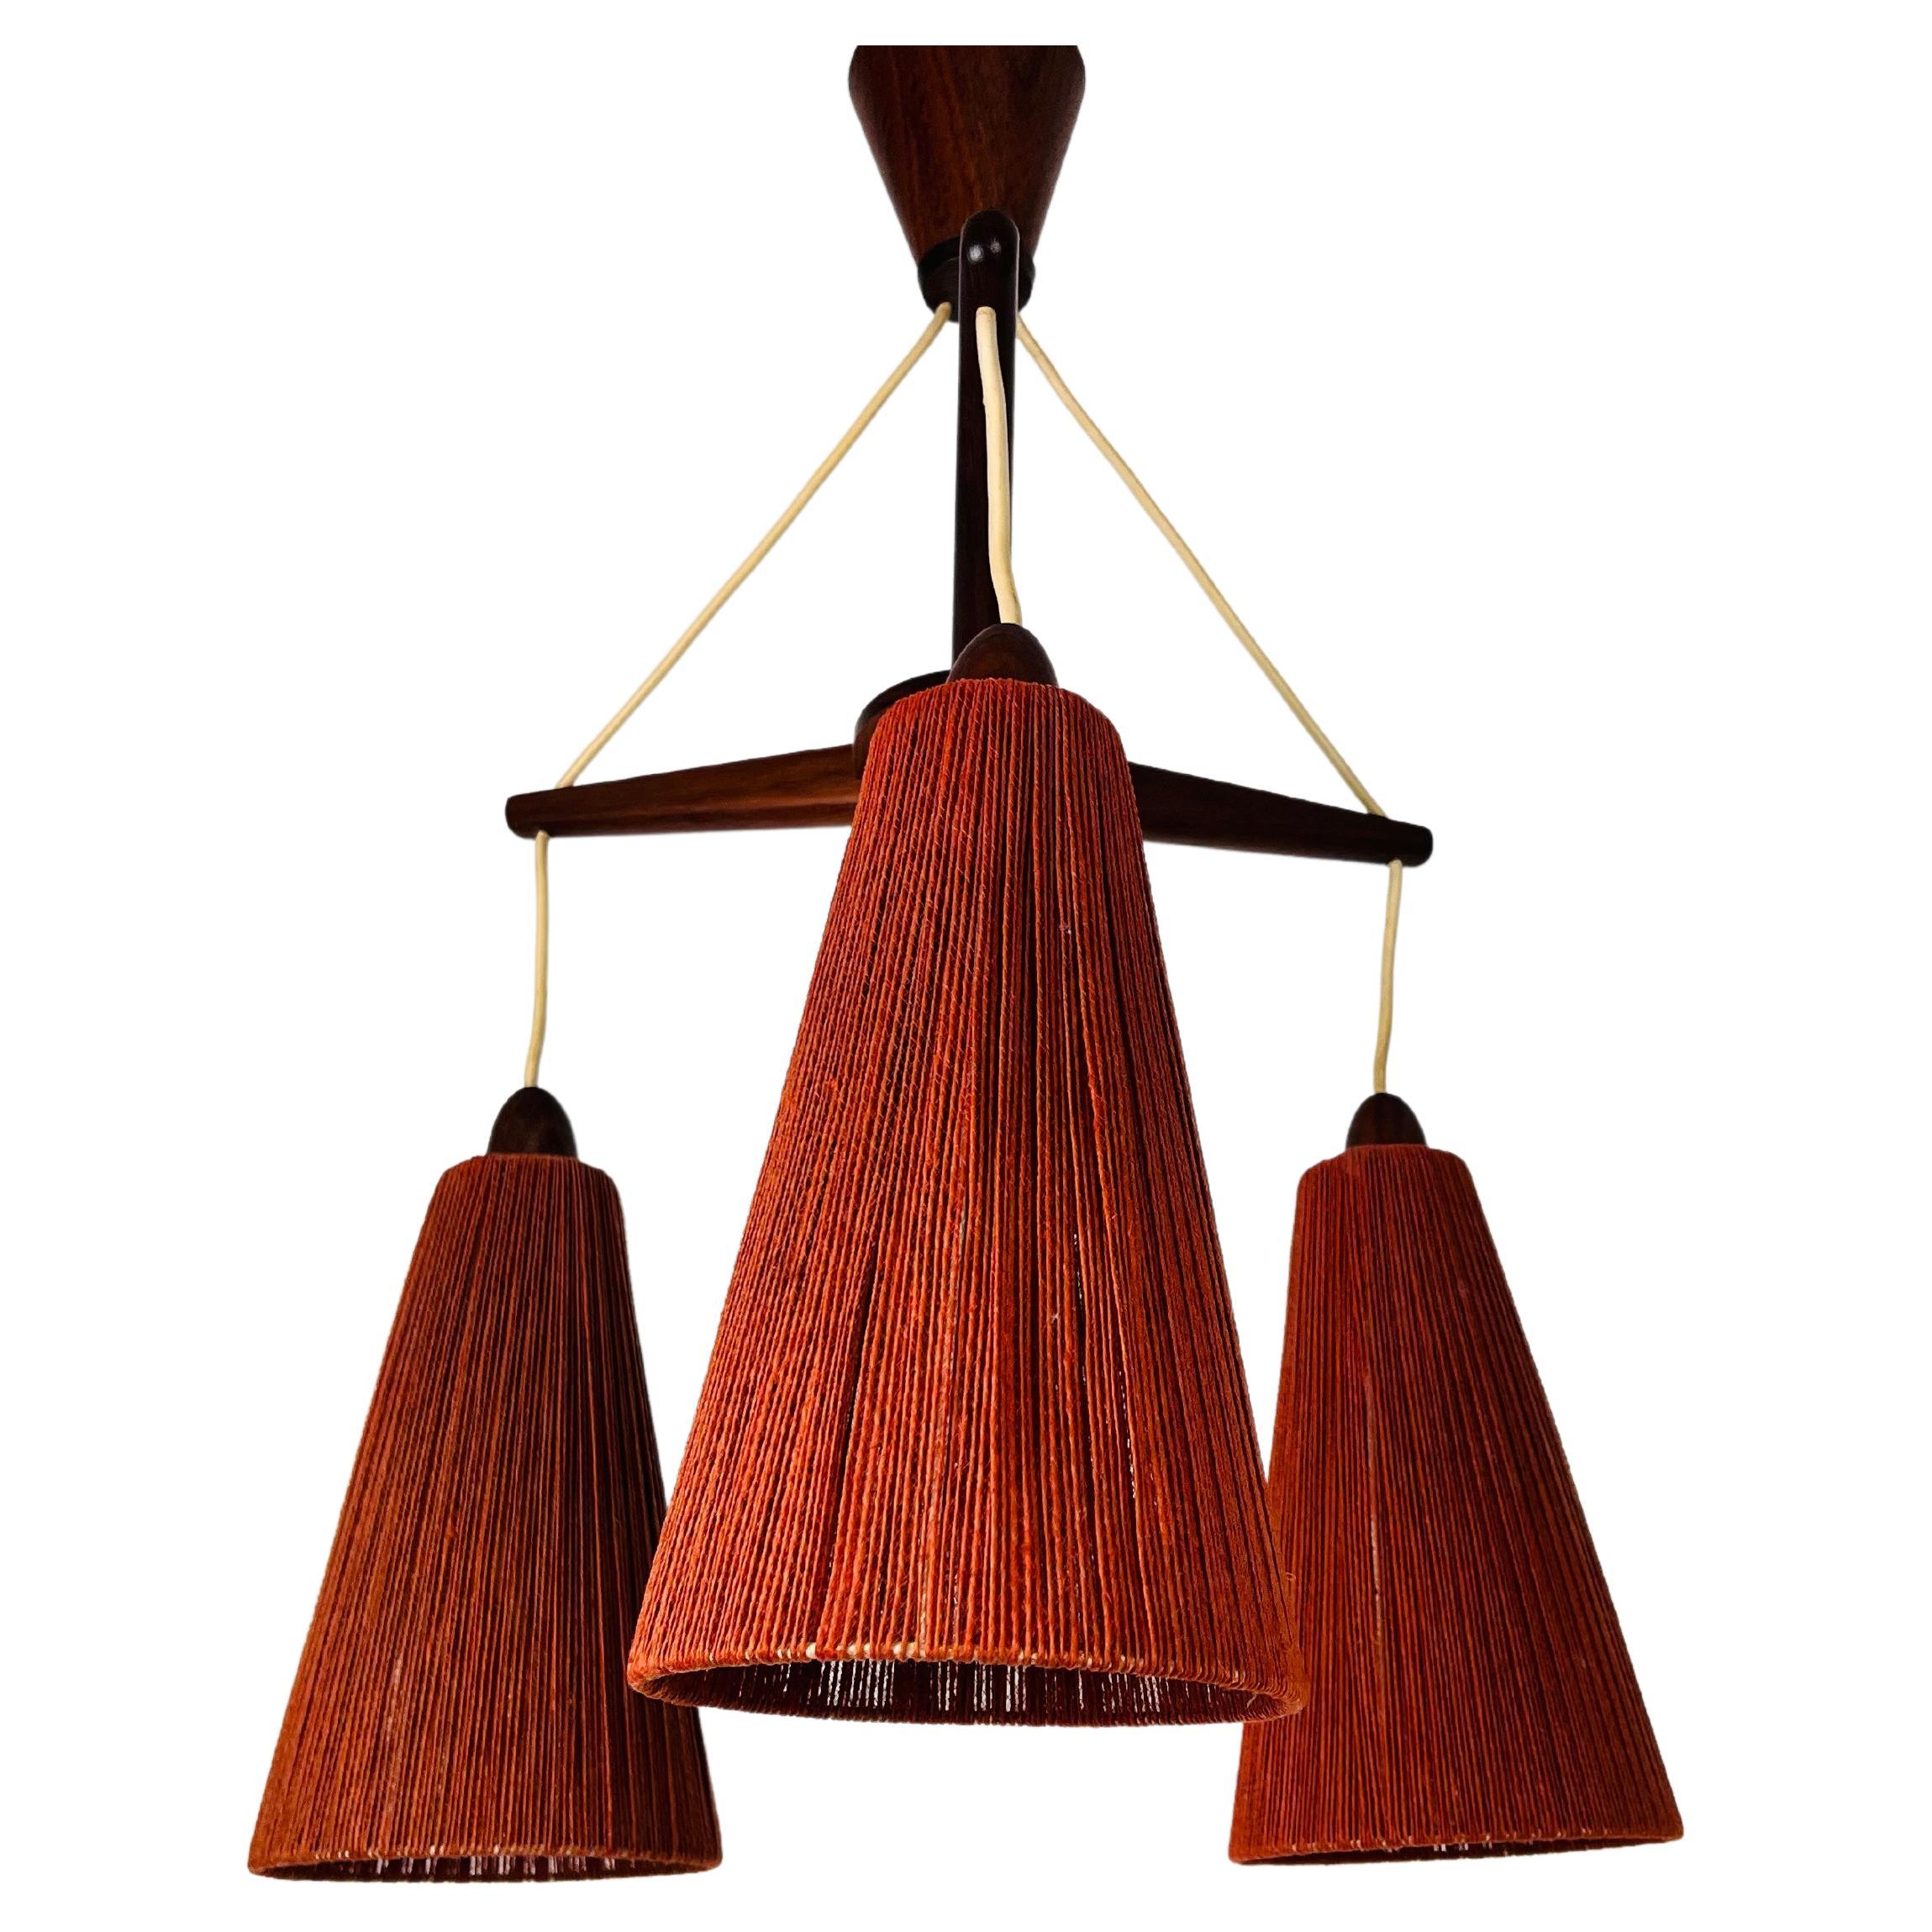 Midcentury Teak and Cord Shade Hanging Lamp by Temde, circa 1960 For Sale